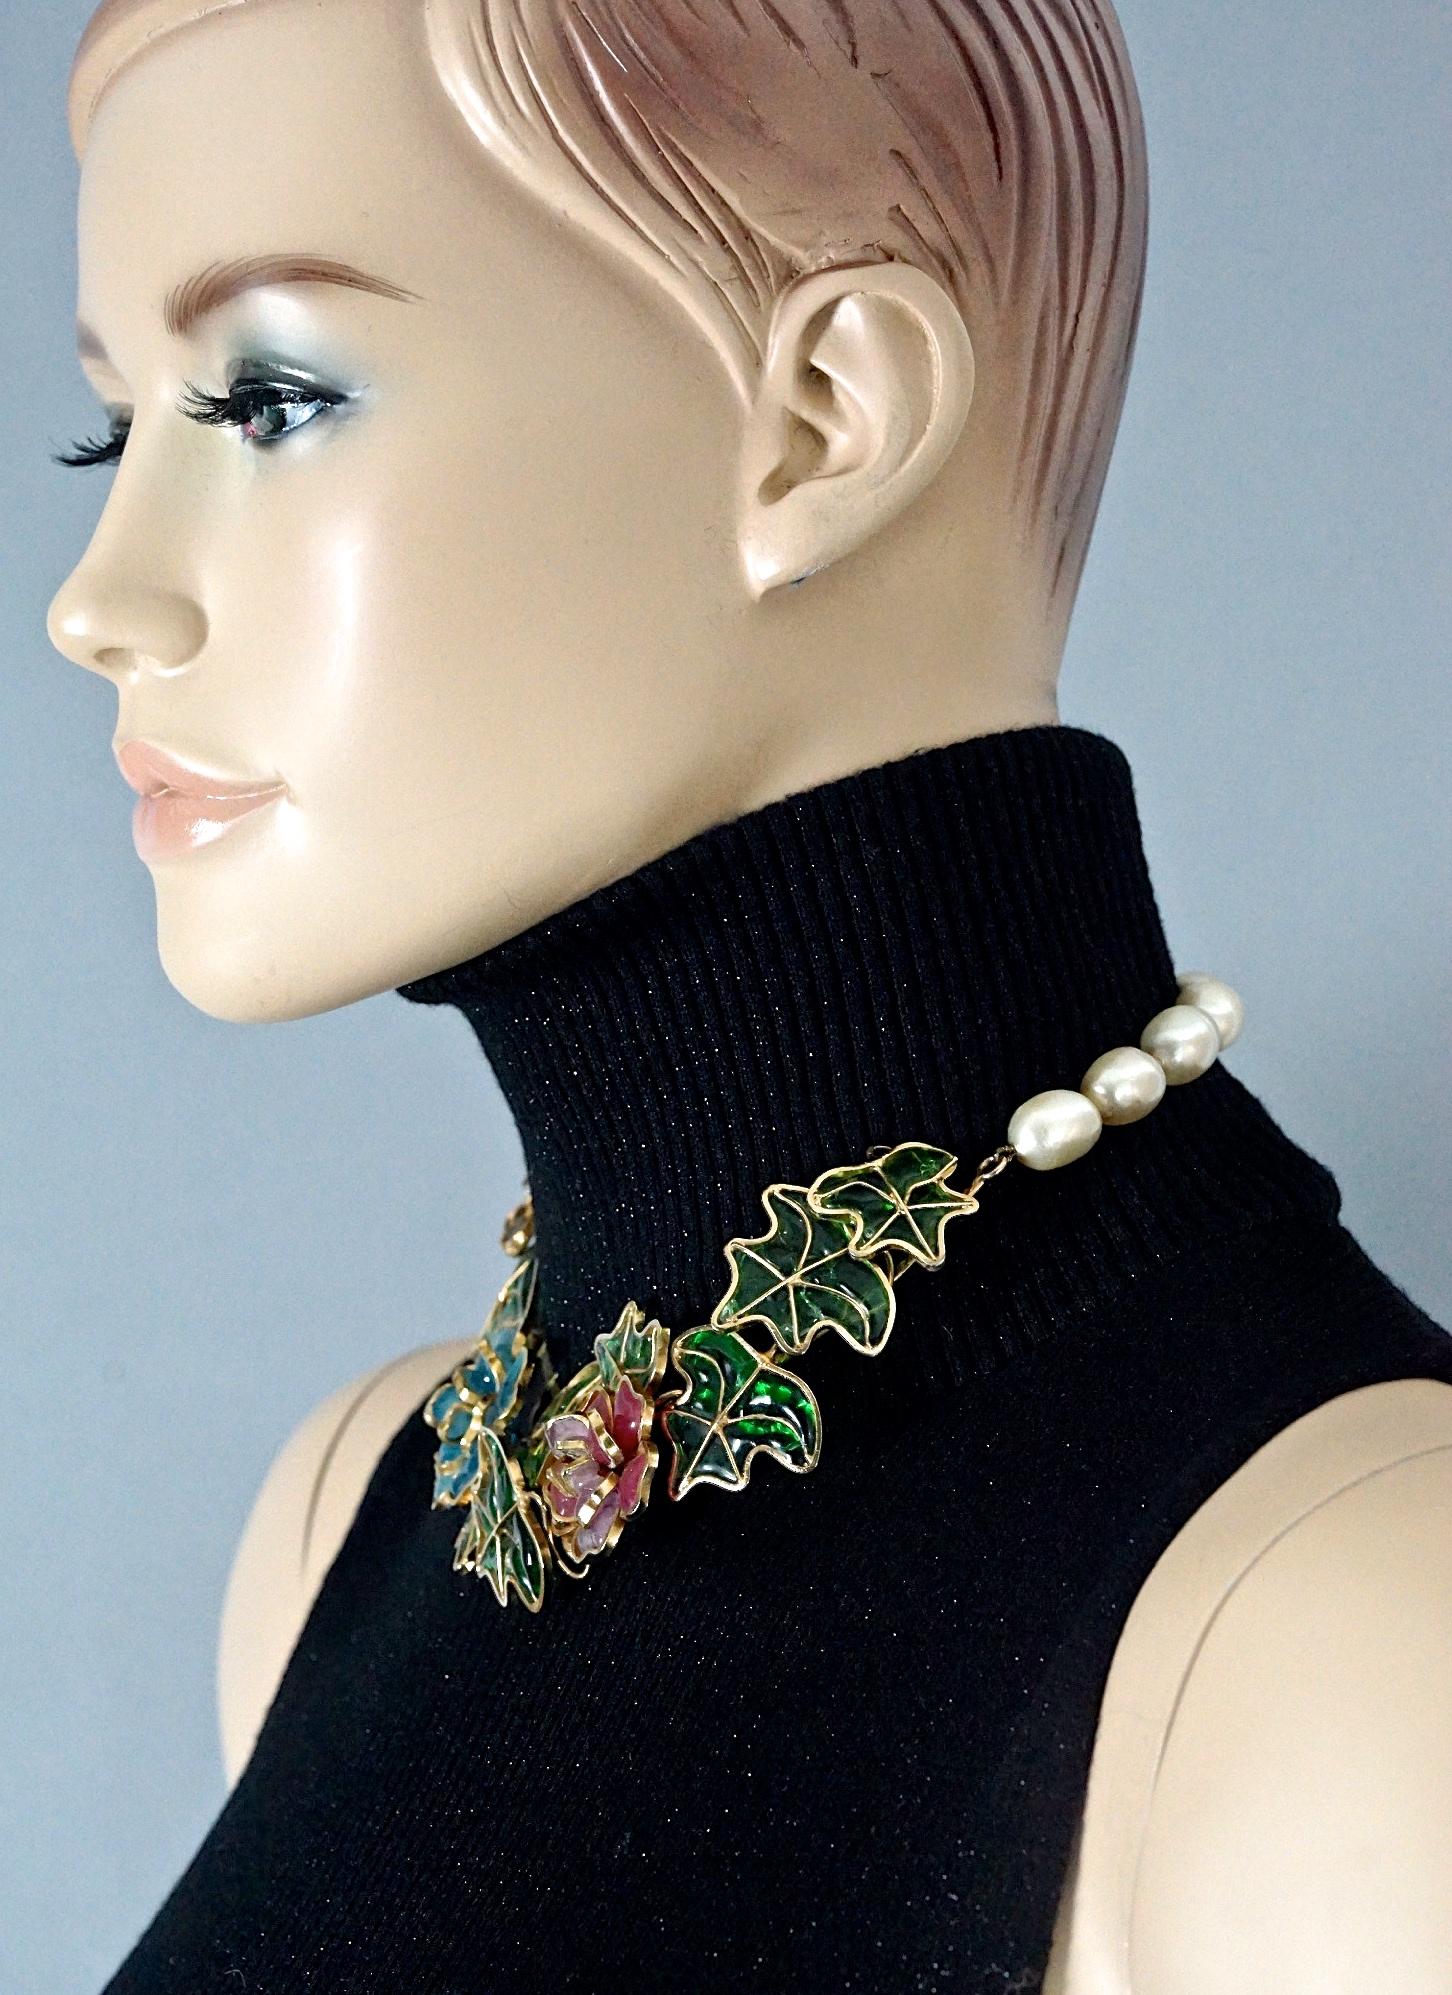 CHANEL MAISON GRIPOIX Poured Glass Flowers and Baroque Pearls Choker Necklace

Measurements:
Height: 1.57 inches (4 cm)
Wearable Length: 13.77 inches (35 cm)

Features:
- 100% Authentic CHANEL by MAISON GRIPOIX.
- Colourful floral centrepiece in